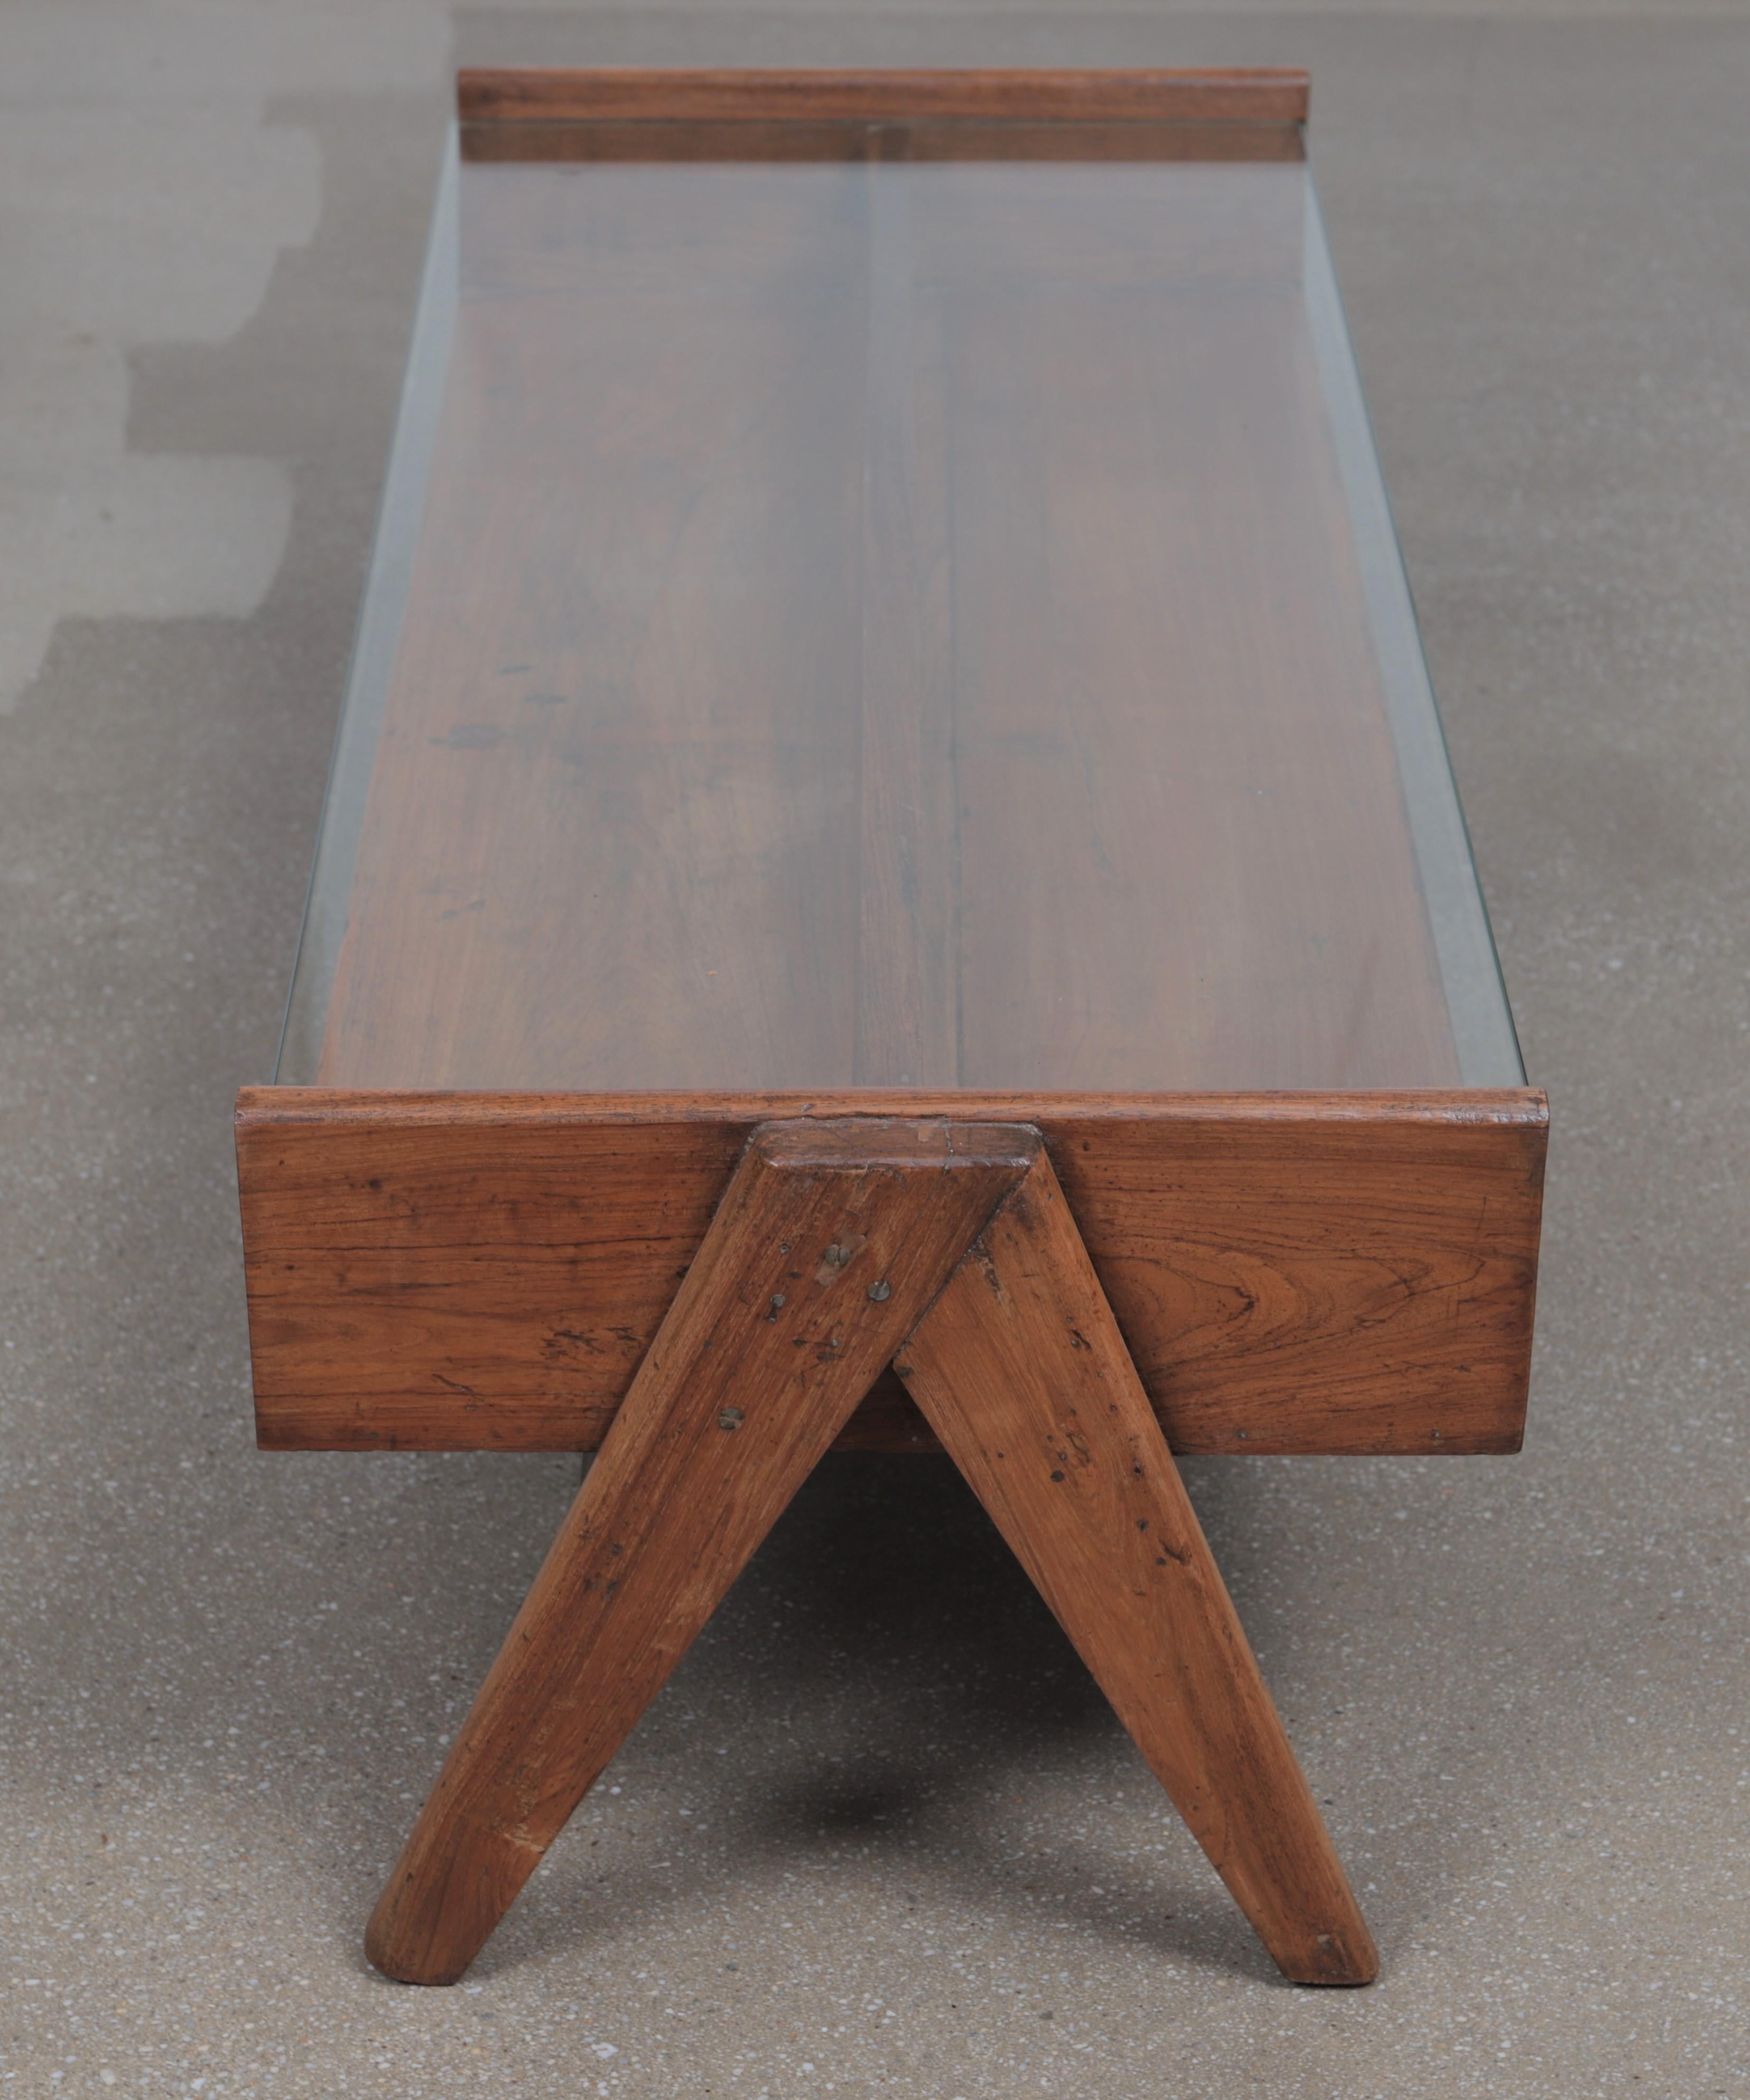 Coffee table with glass top, circa 1960.
Two feets type ‘V’ with open box, glass top.
Teak wood.
Provenance: Assemblée, bâtiments administratifs, Private House Chandigarh, Inde.
Measures: H 38.5, L 119, P 46 cm.
A certificate of expertise will